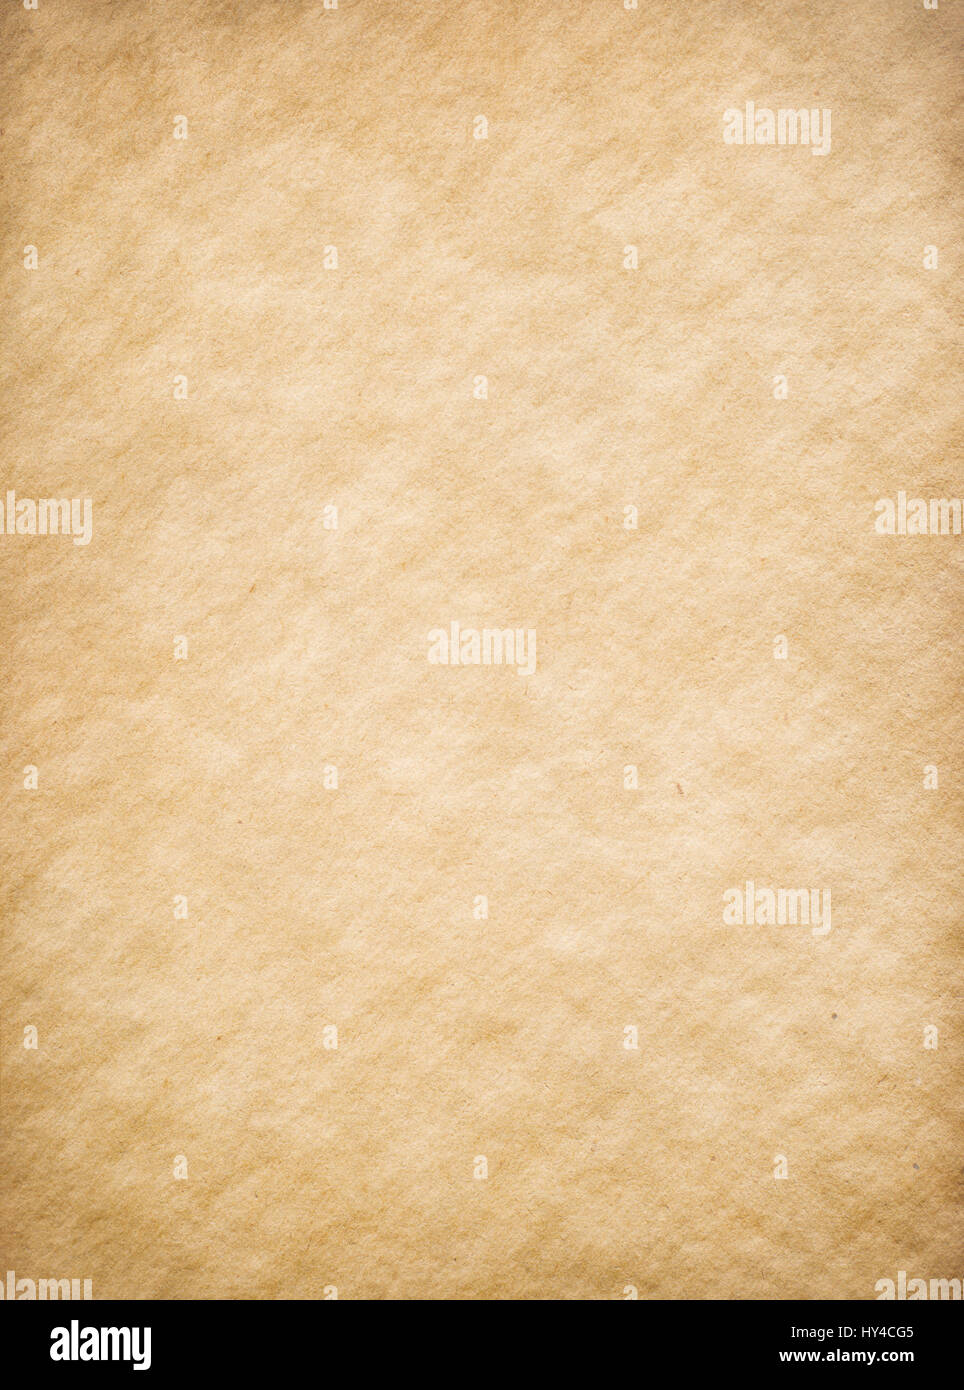 old paper sheet texture or background Stock Photo